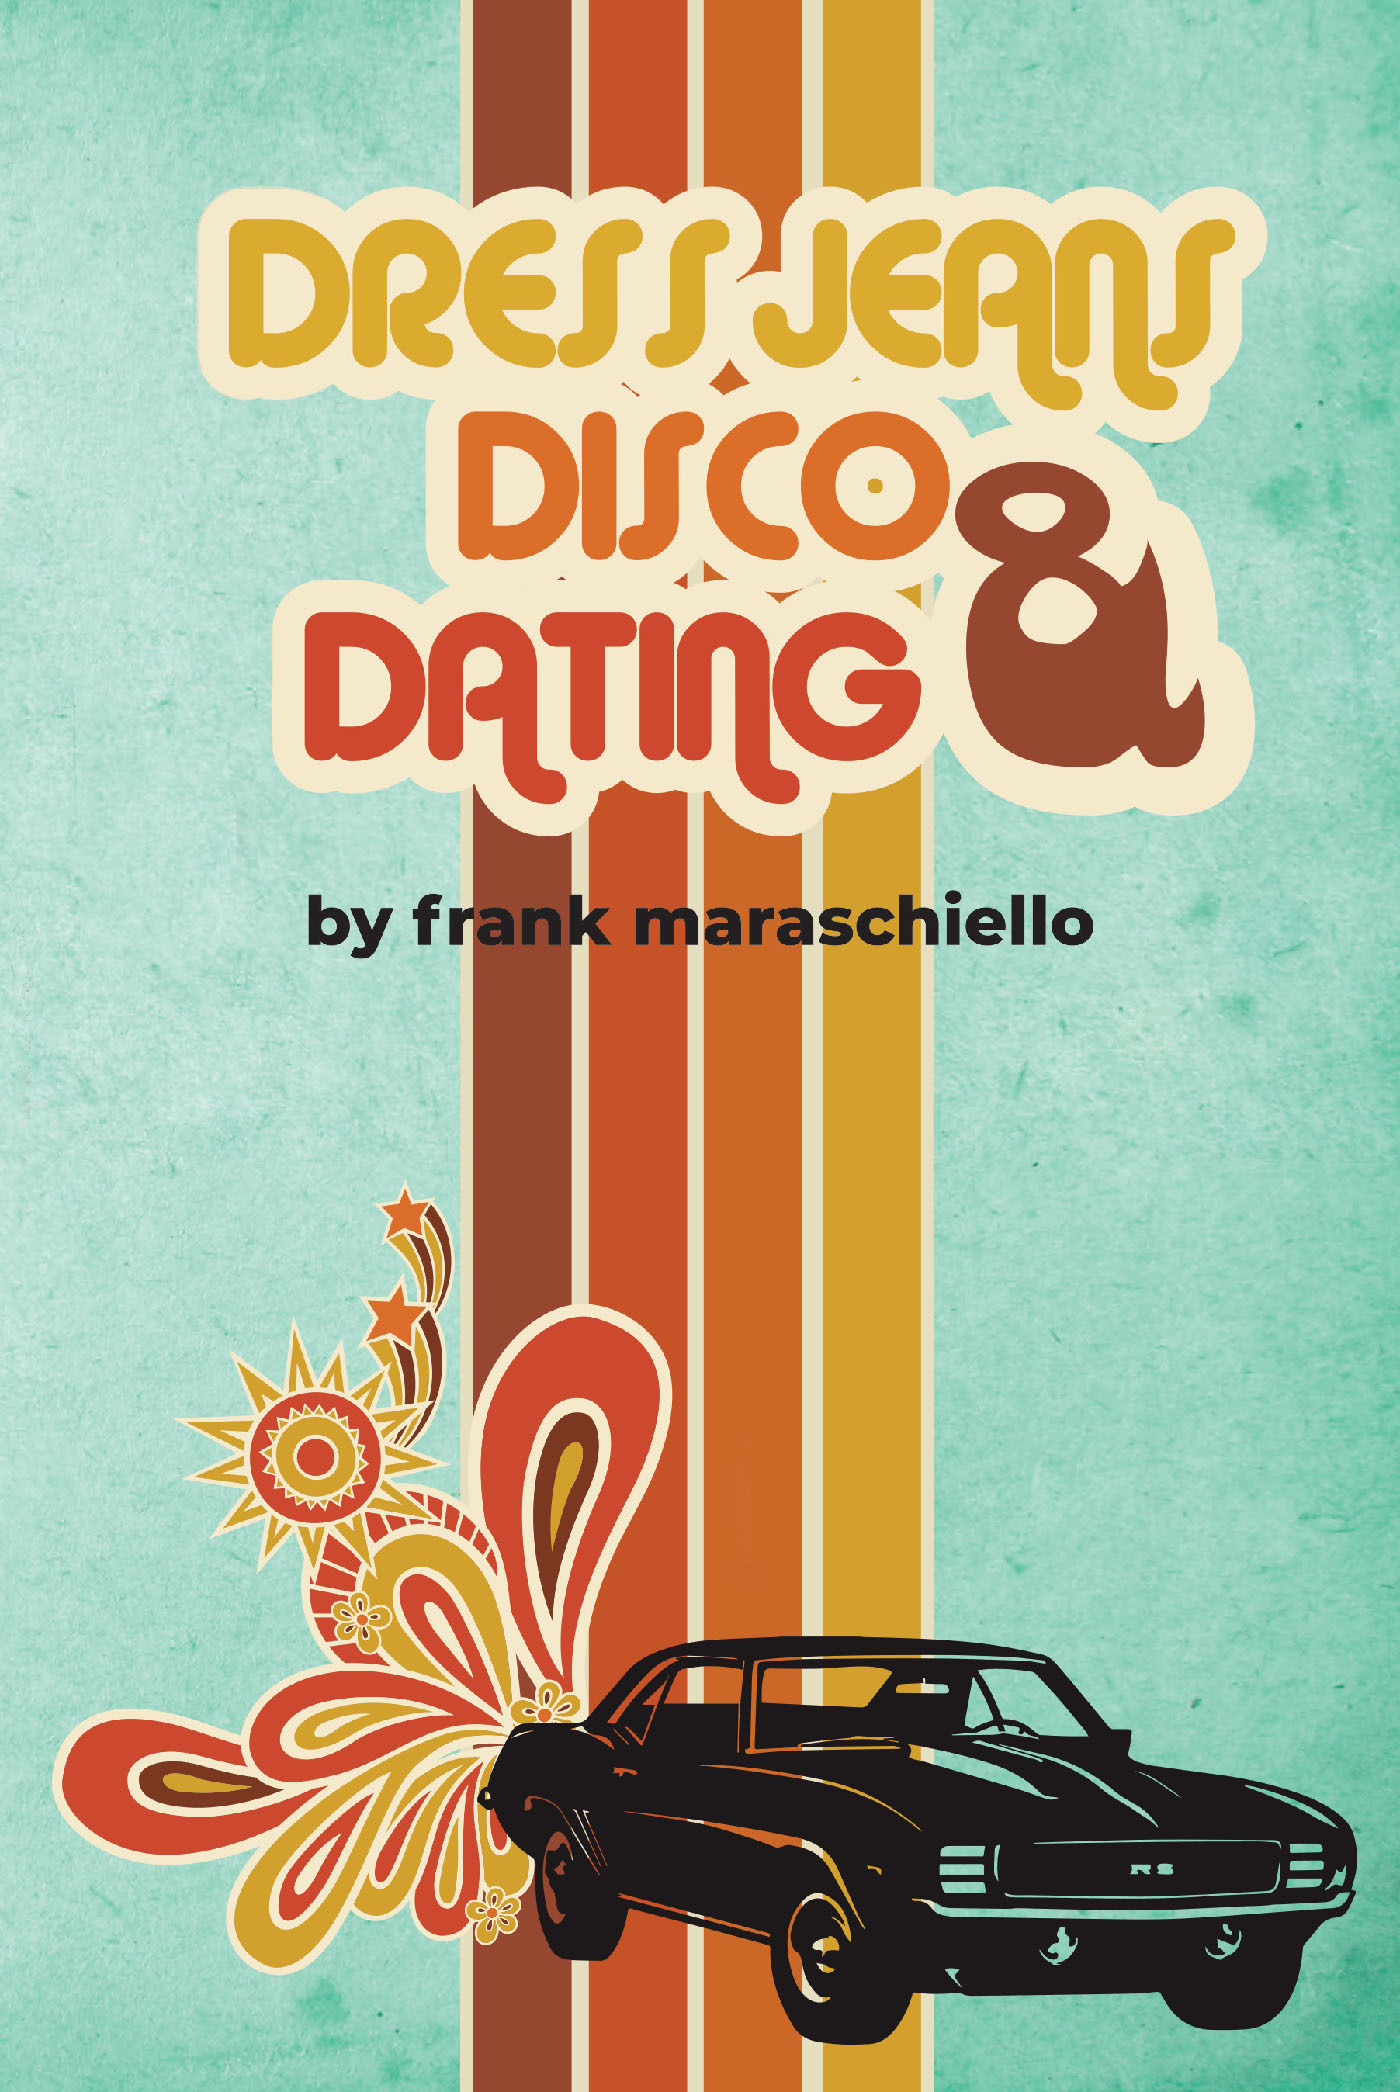 Dress Jeans, Disco and Dating Cover Image